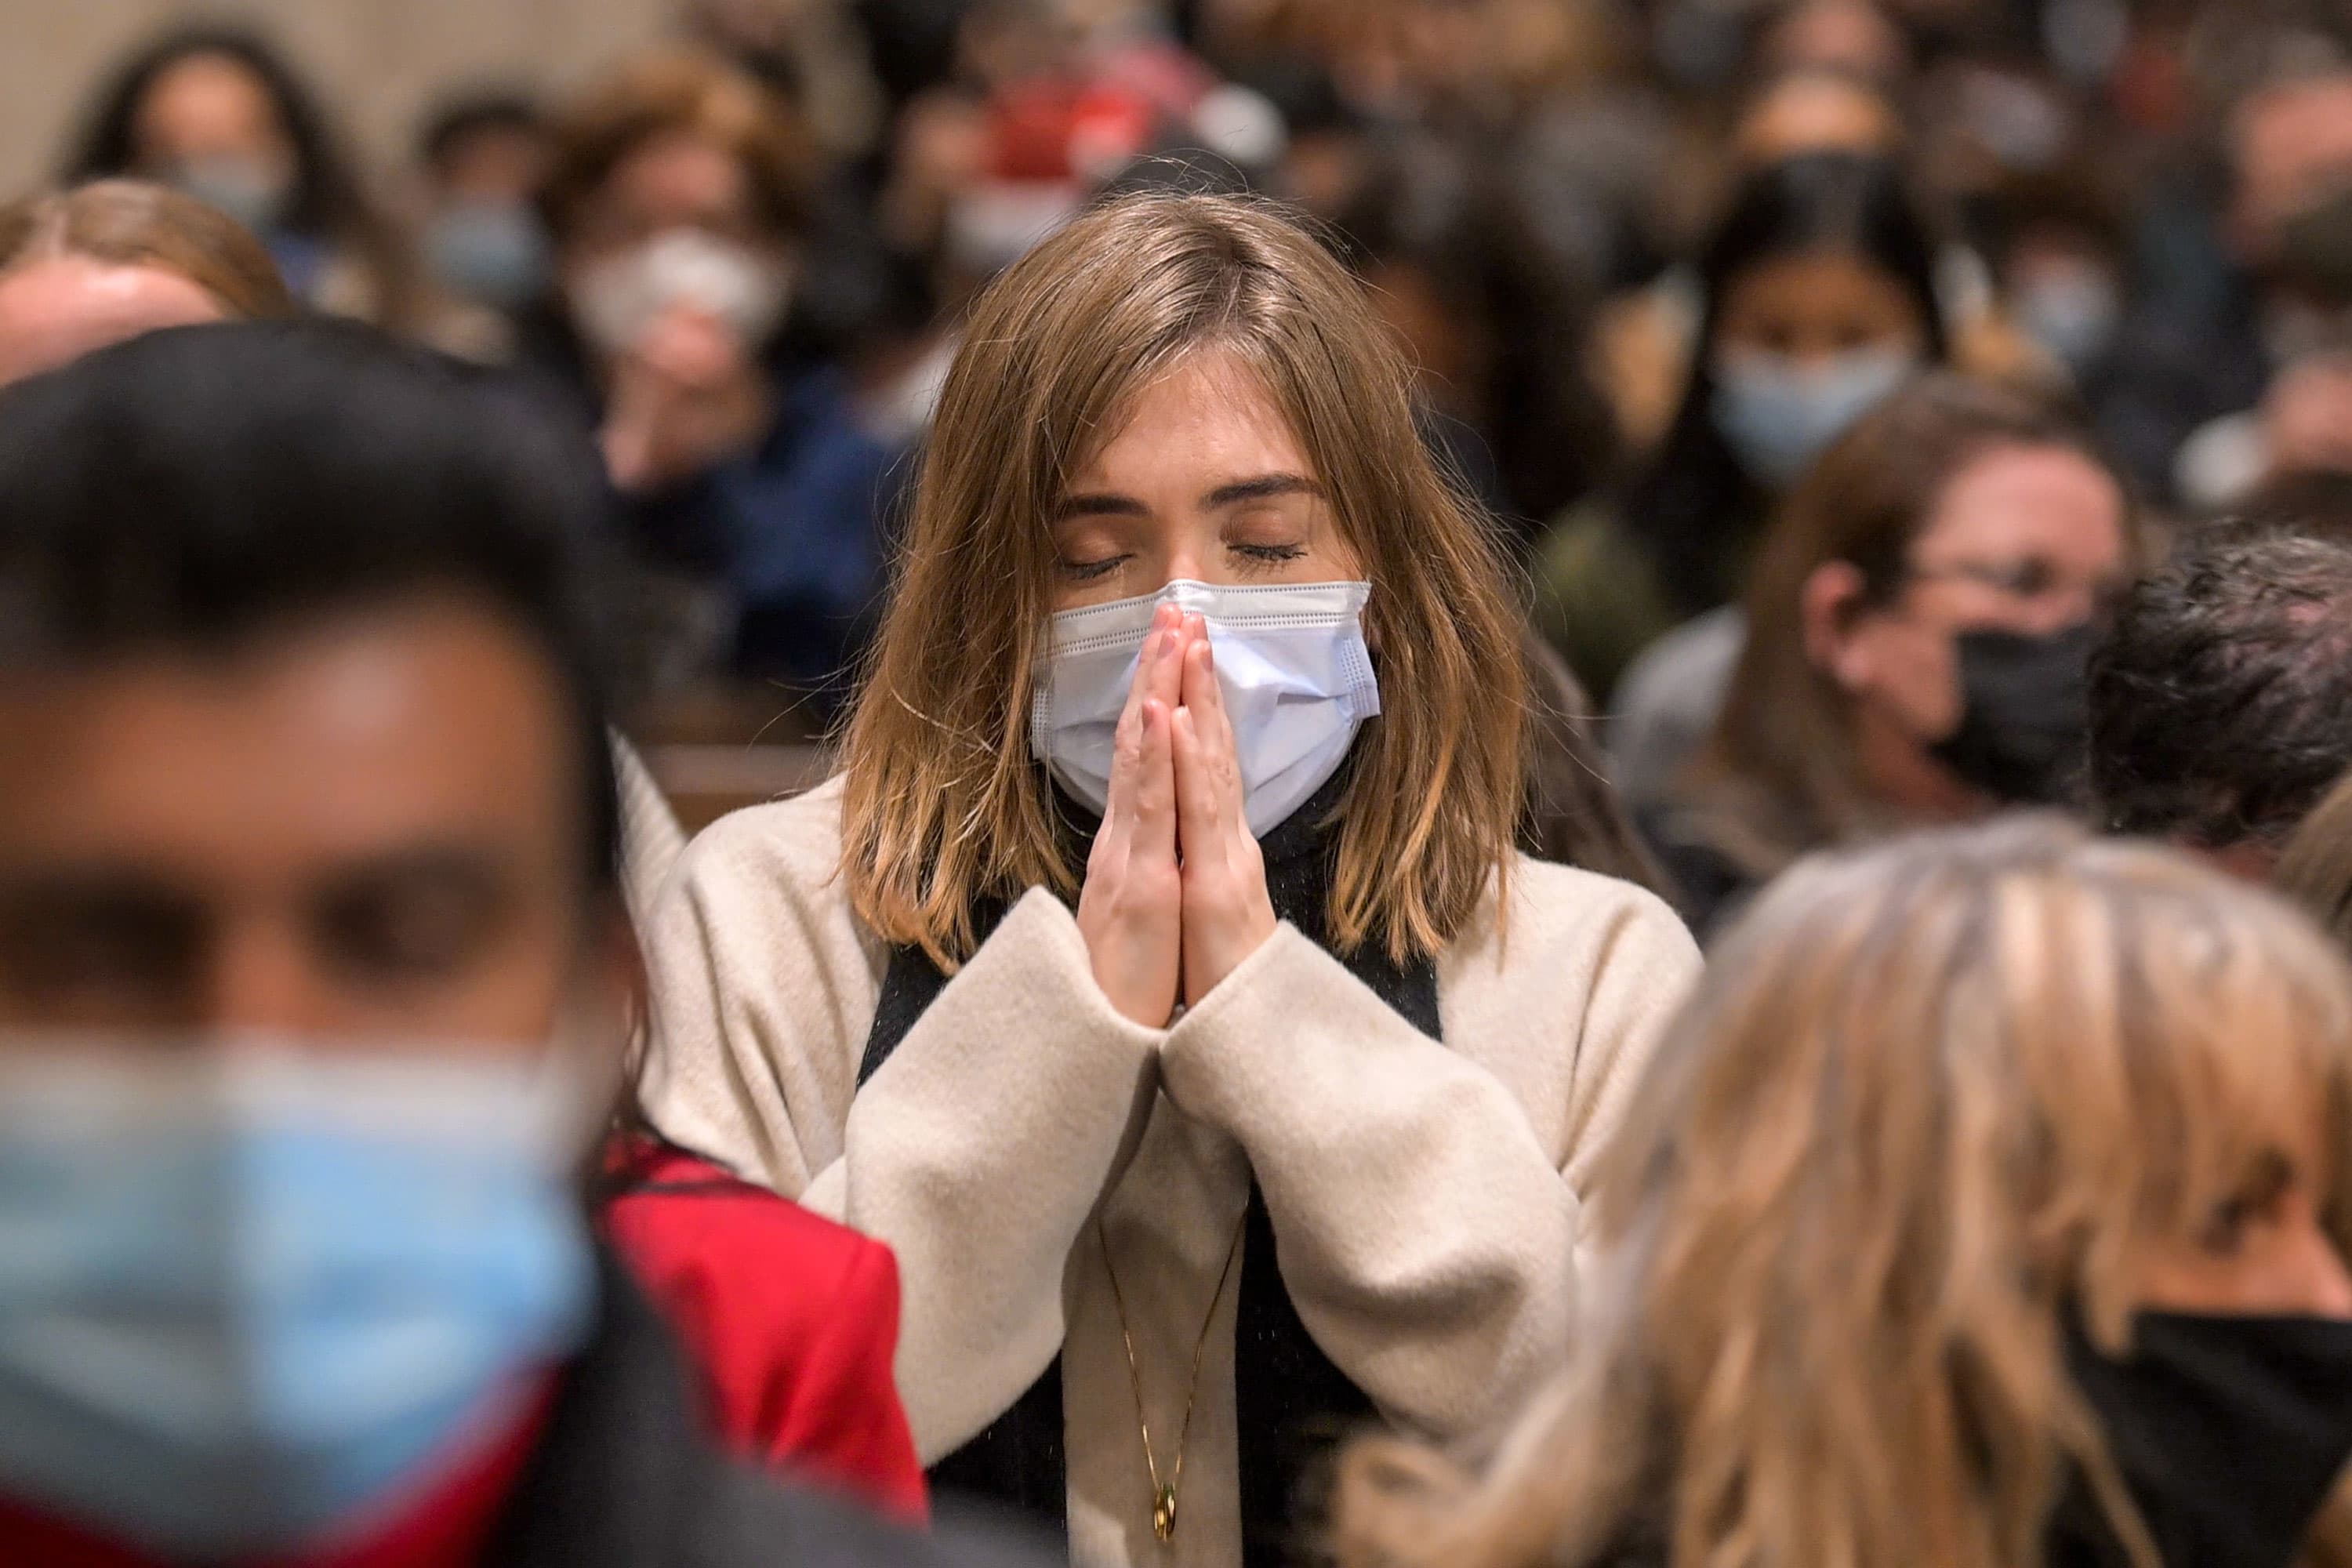 Millennials lead shift away from organized religion as pandemic tests Americans'..